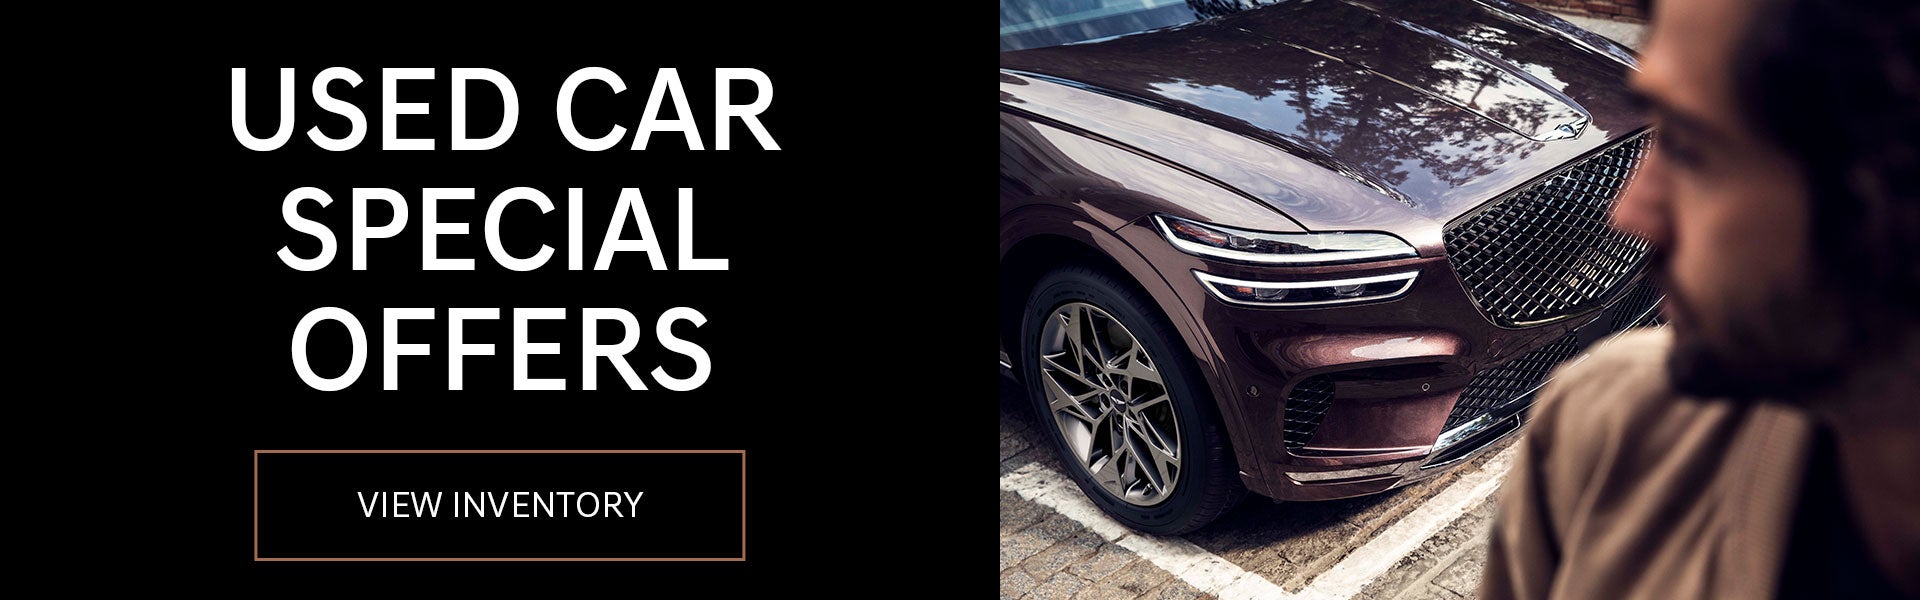 View our Used Car Special Offers